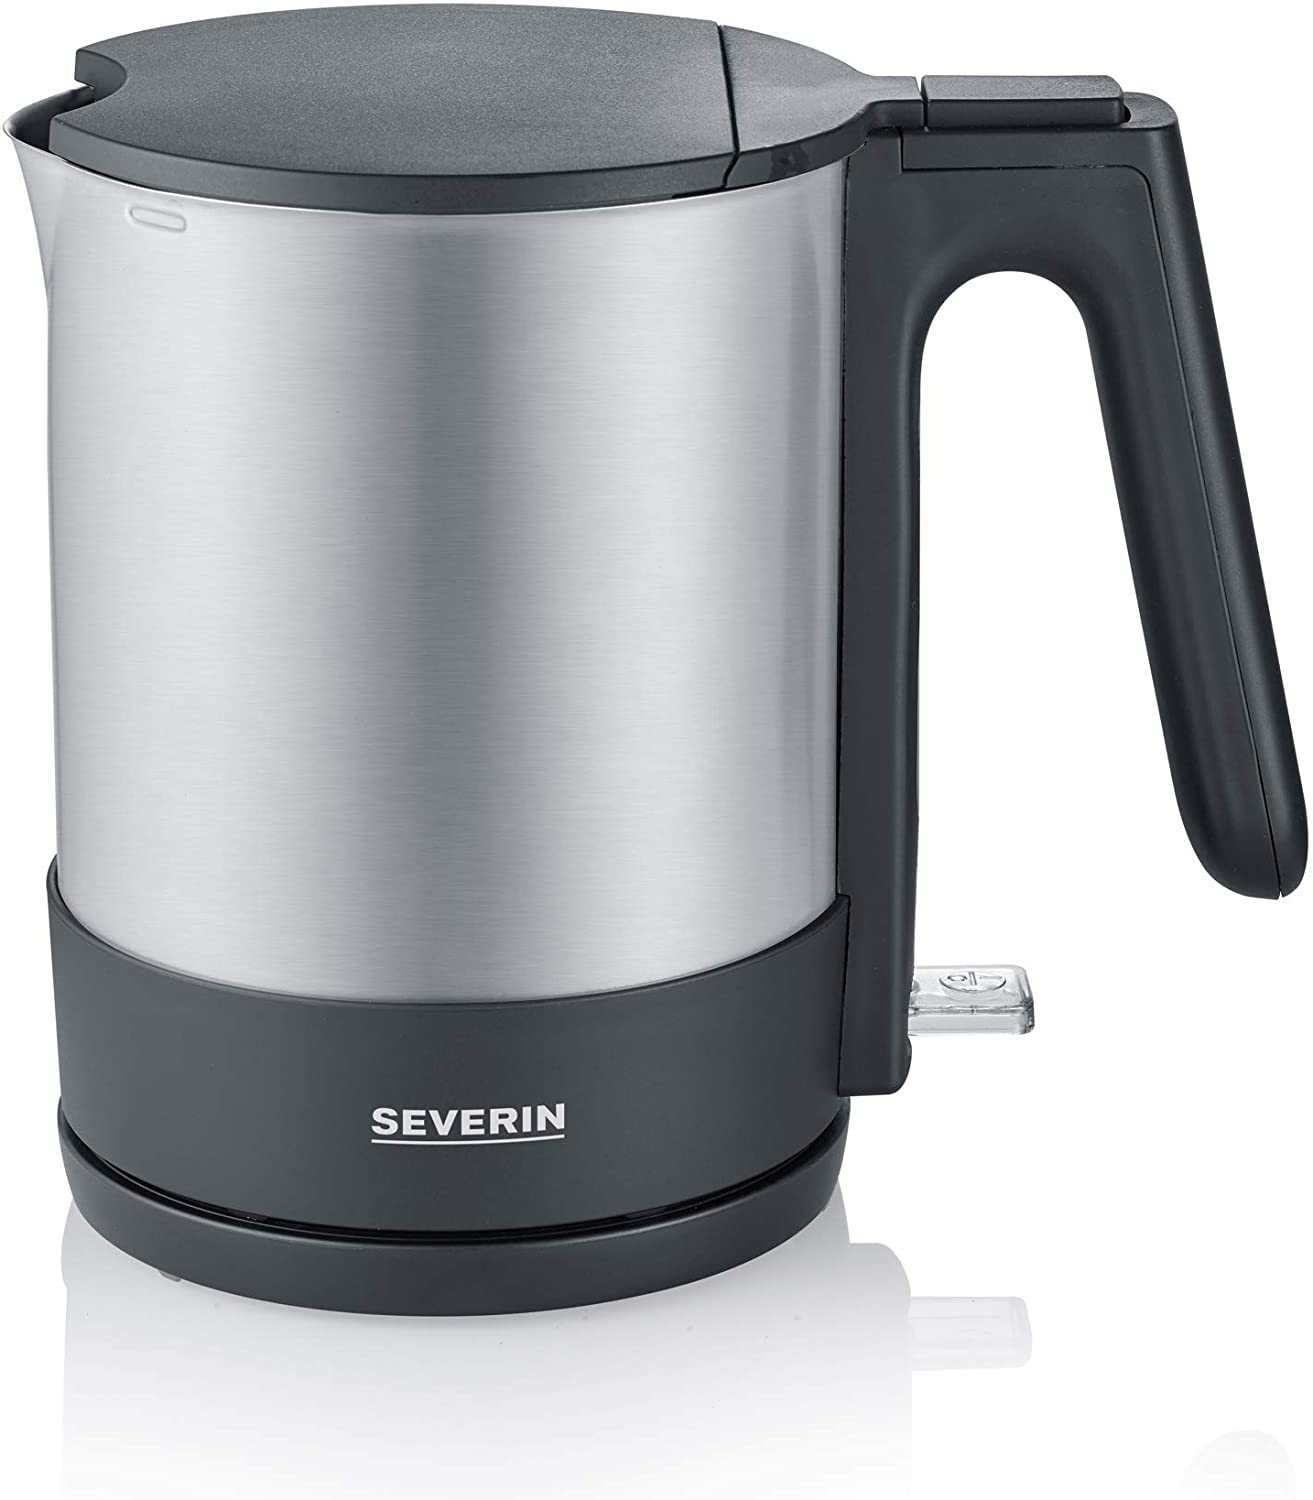 SEVERIN Kettle, Powerful and Compact Stainless Steel Kettle in High-Quality